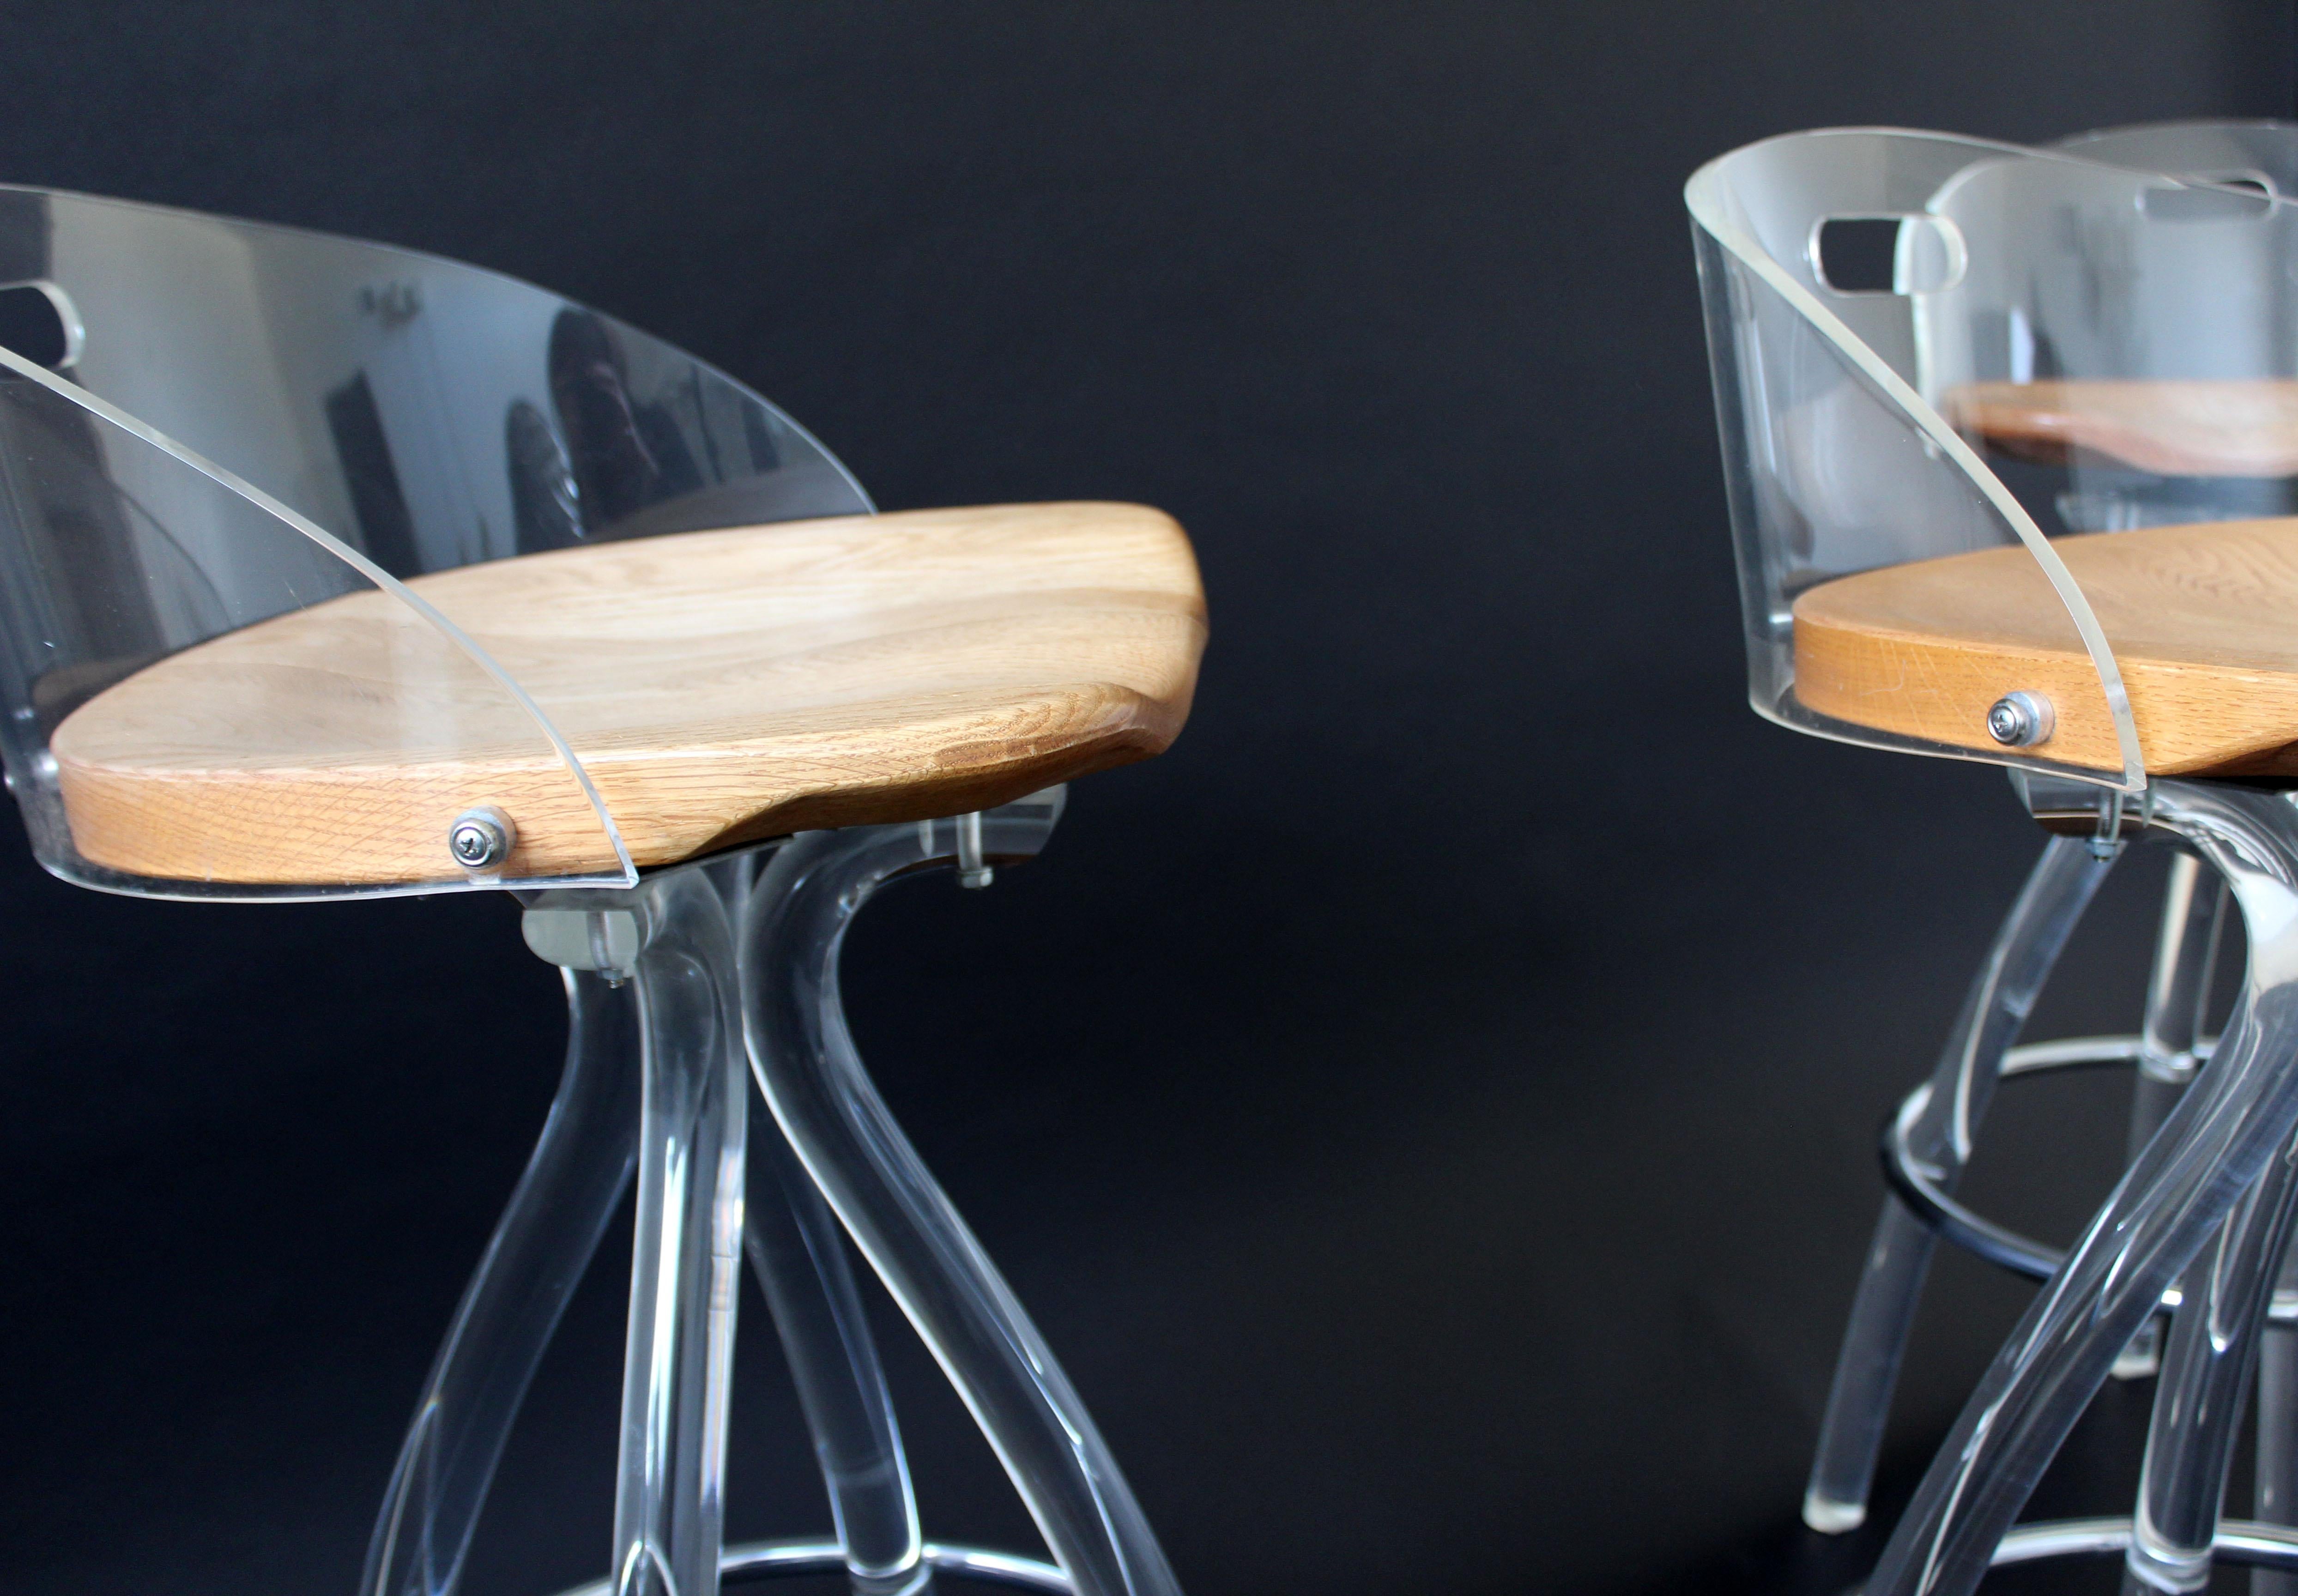 Late 20th Century Mid-Century Modern Set of 3 Lucite Wood Saddle Seat Bar Stools by Hill Mfg 1970s